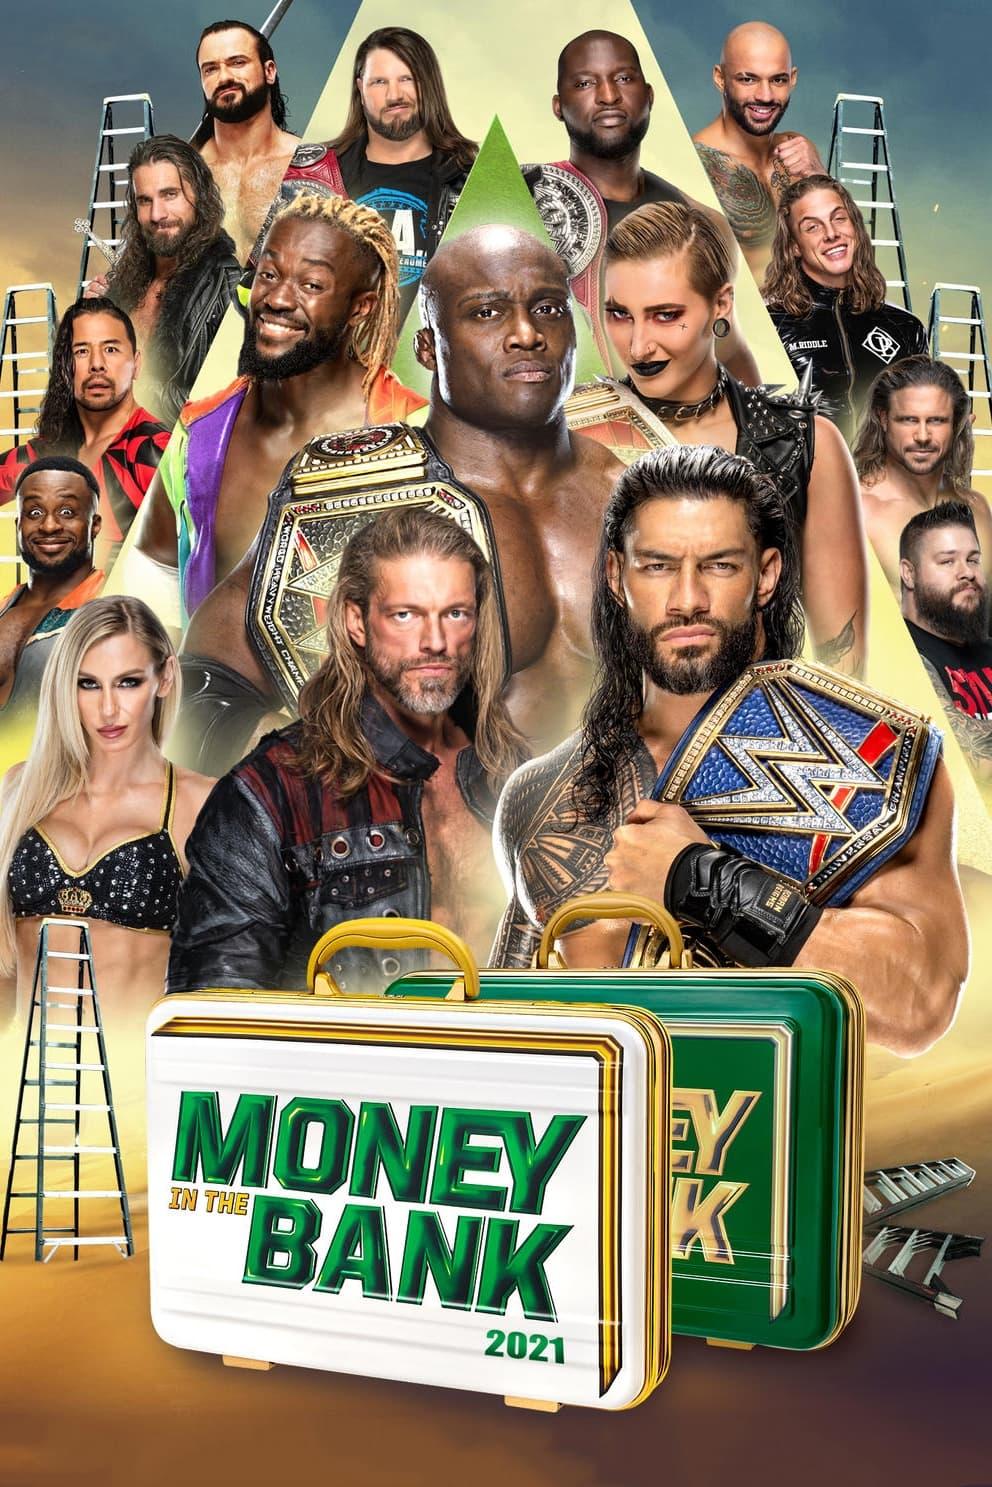 WWE Money in the Bank 2021 poster